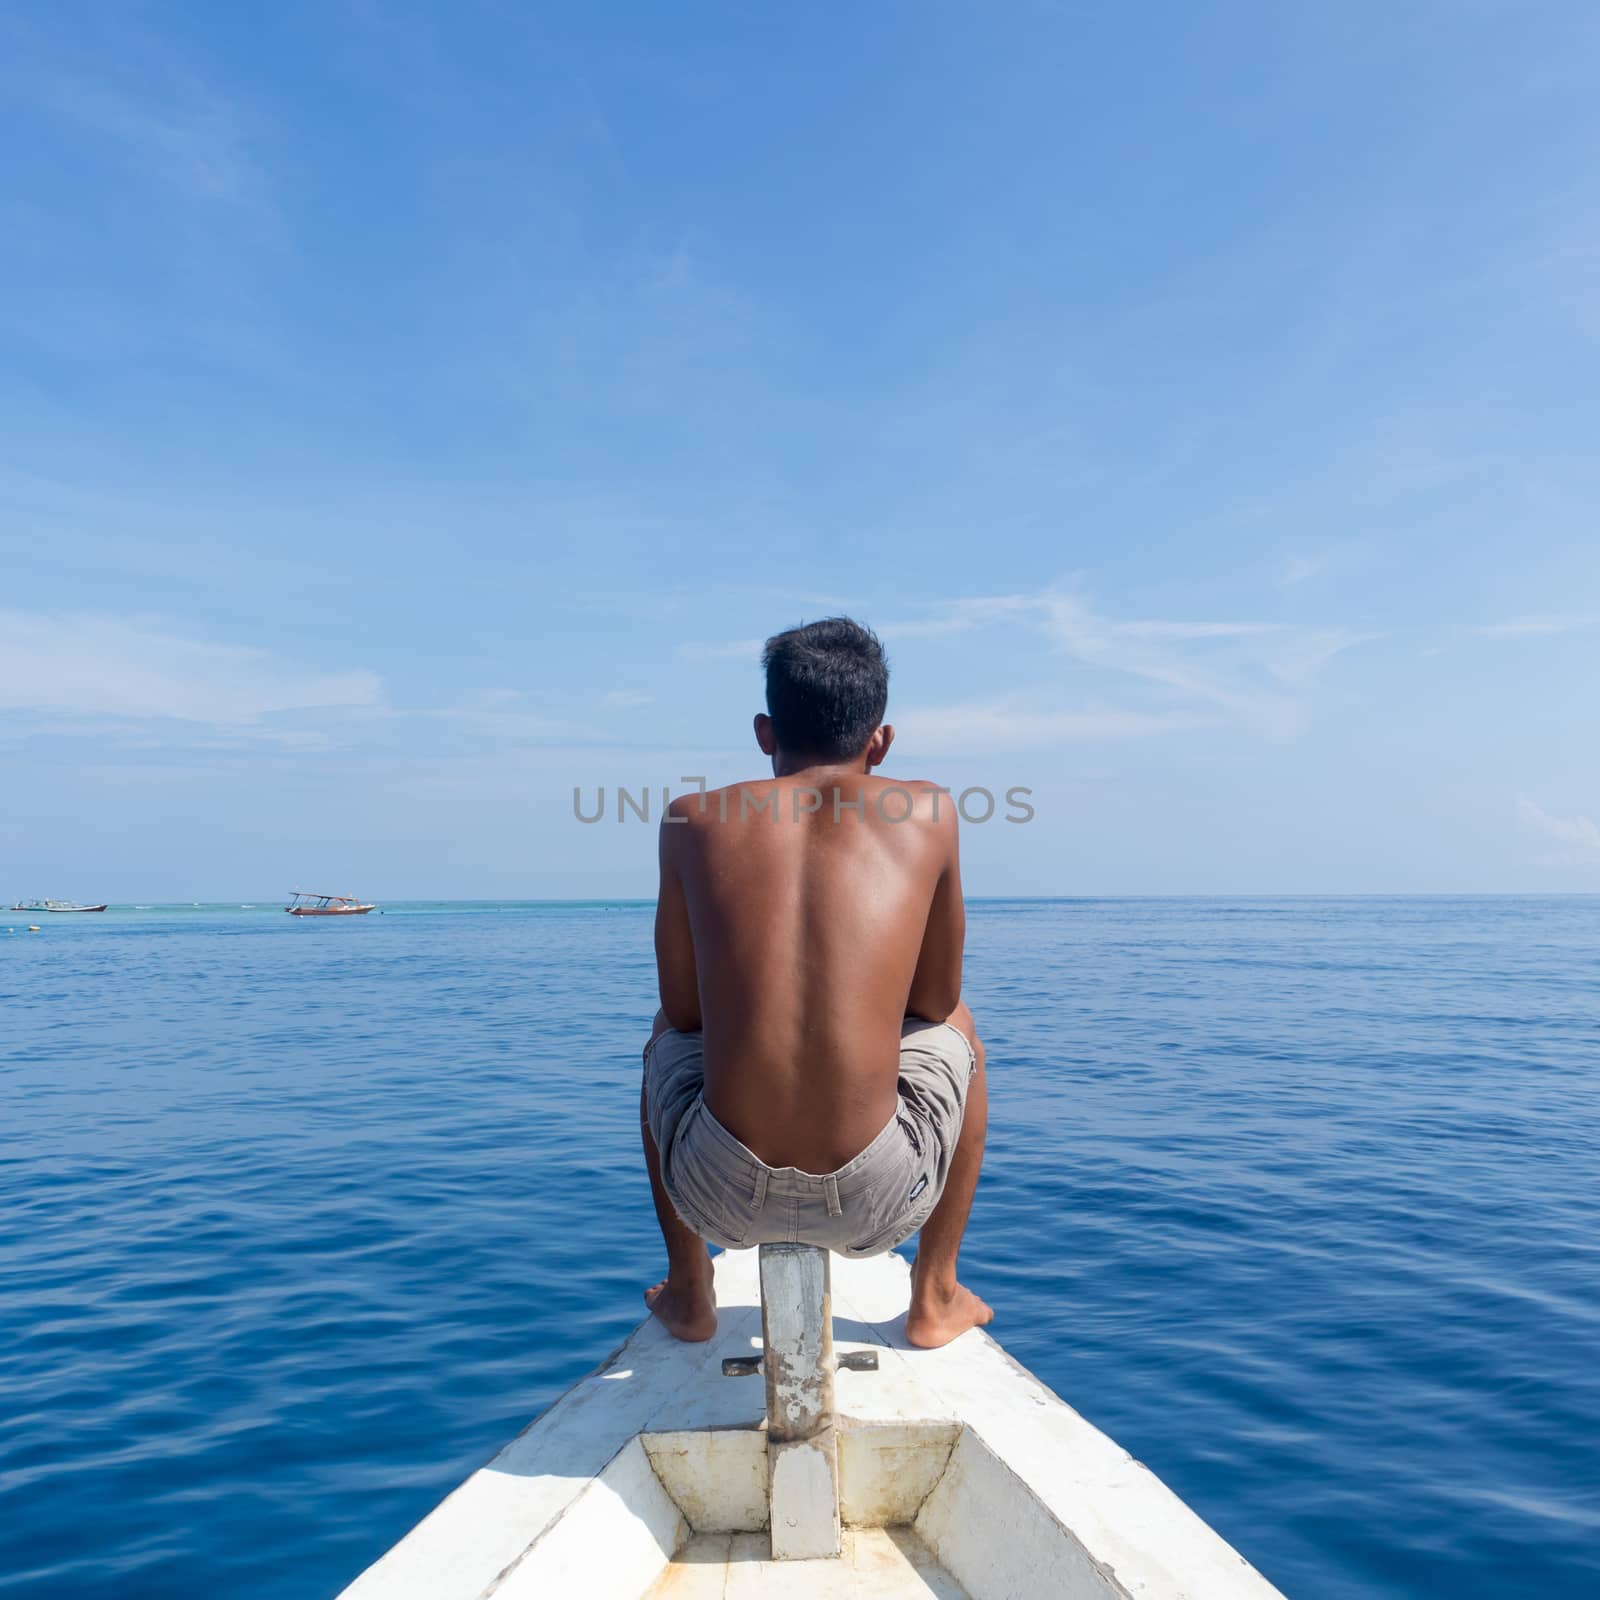 Unrecognizable Local Sporty Guy Sitting Topless at the Bow of Traditional White Wooden Sail Boat, Enjoying the Breeze, Looking At Beautiful Blue Sea of Gili Islands near Bali, Indonesia.